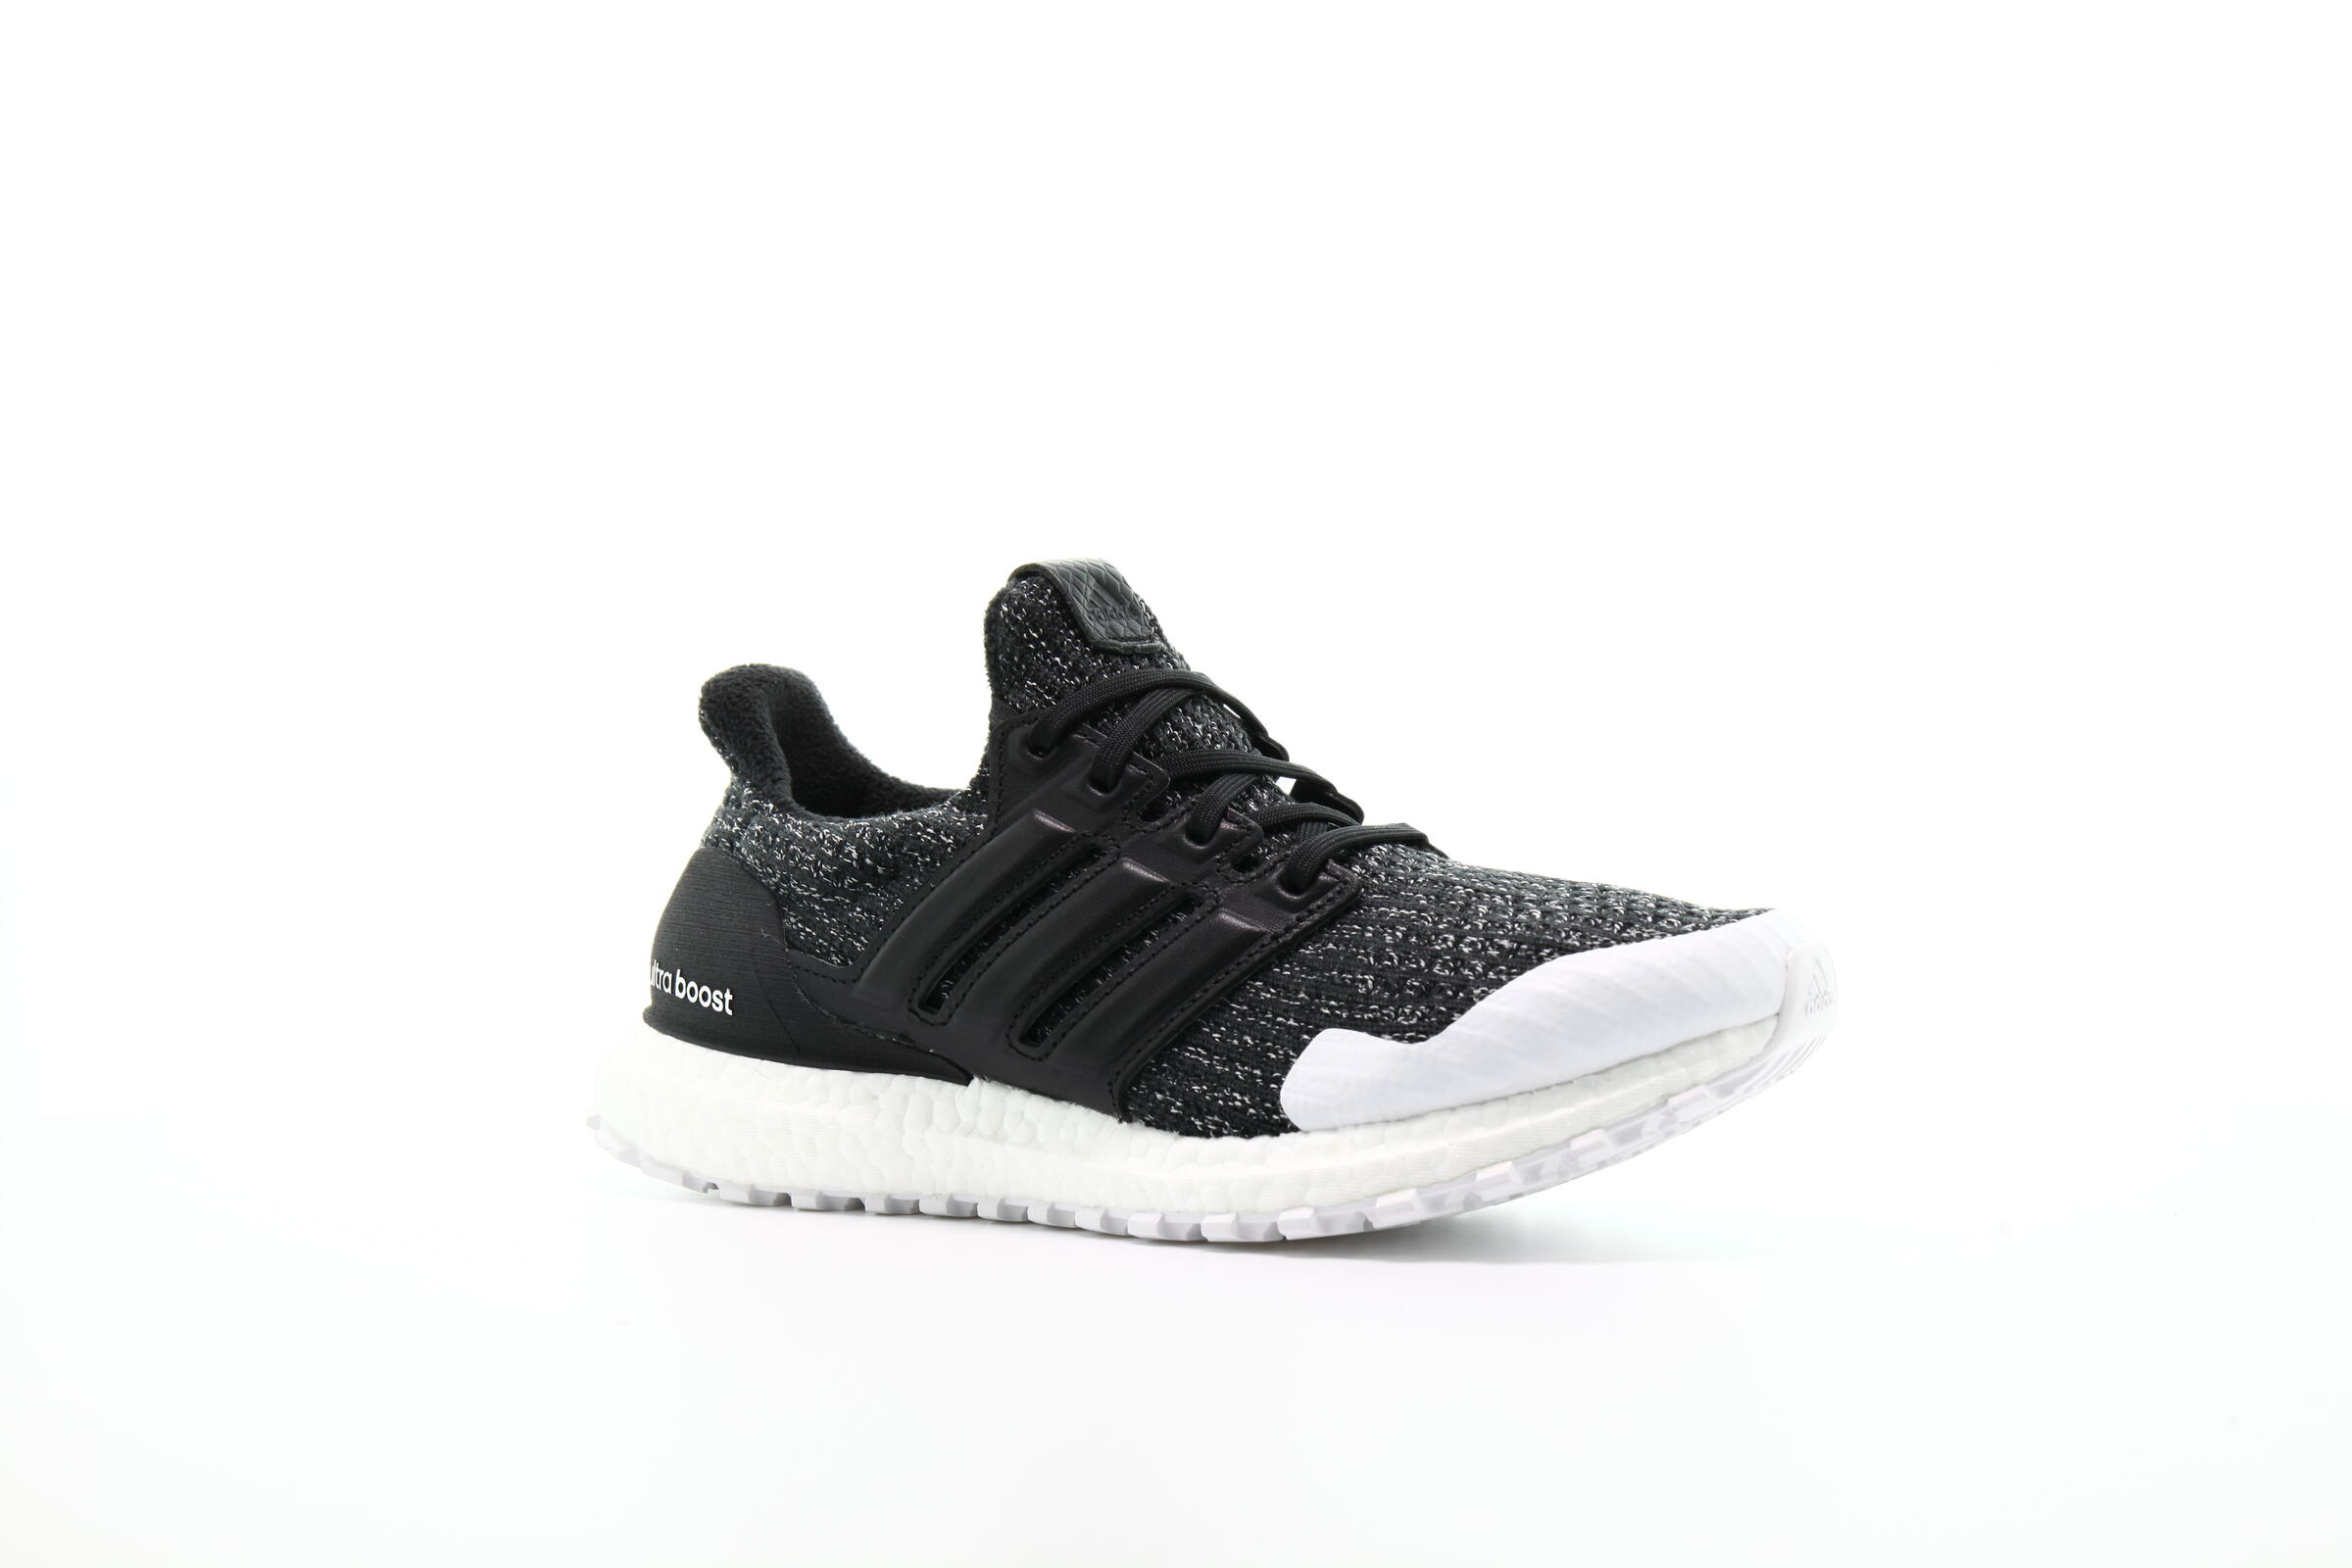 adidas Performance x Game of Thrones Ultraboost "Night's Watch"